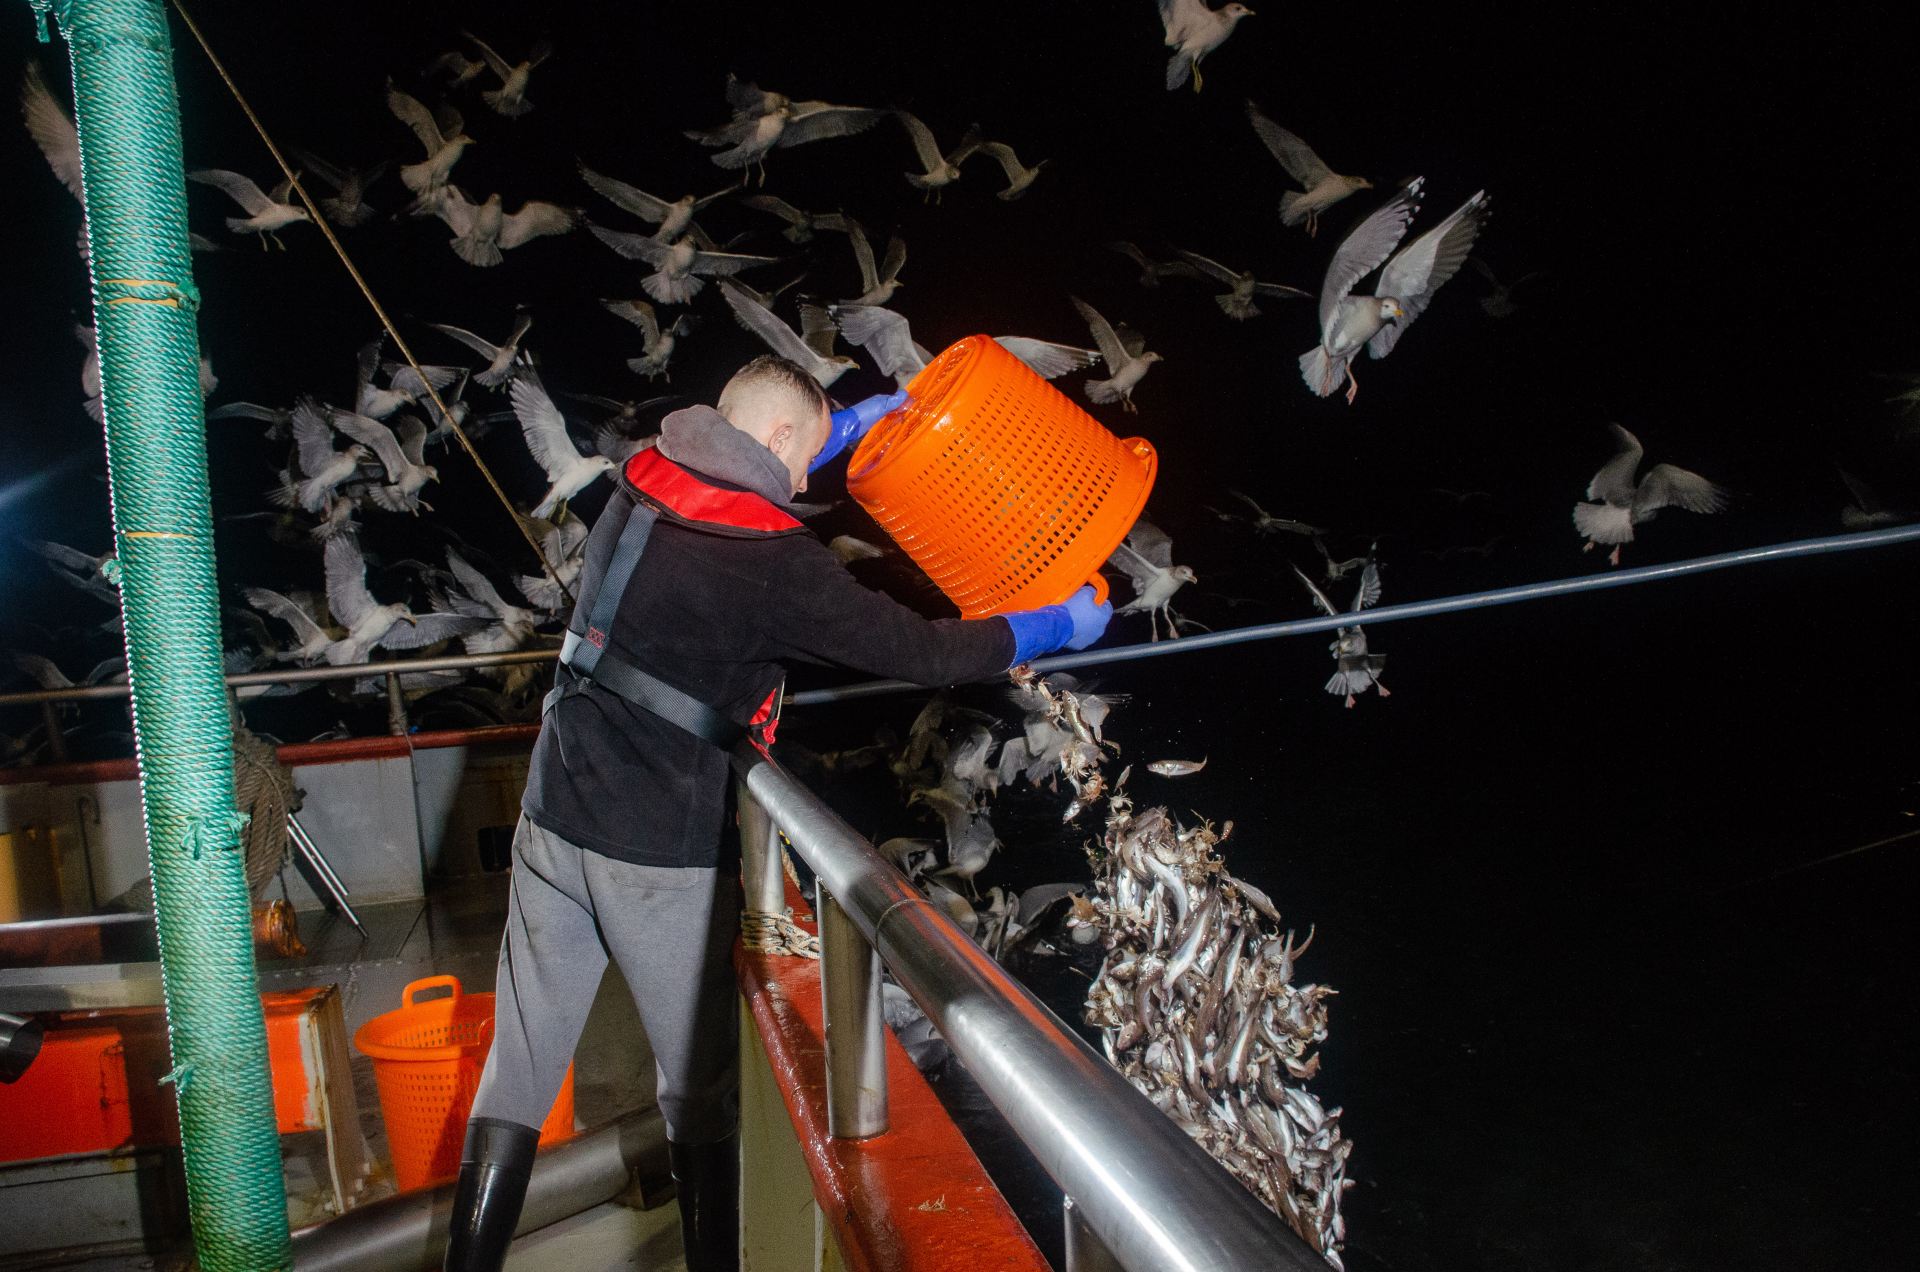 Fisherman emptying bucket of fish and crabs into the sea, surrounded by seagulls